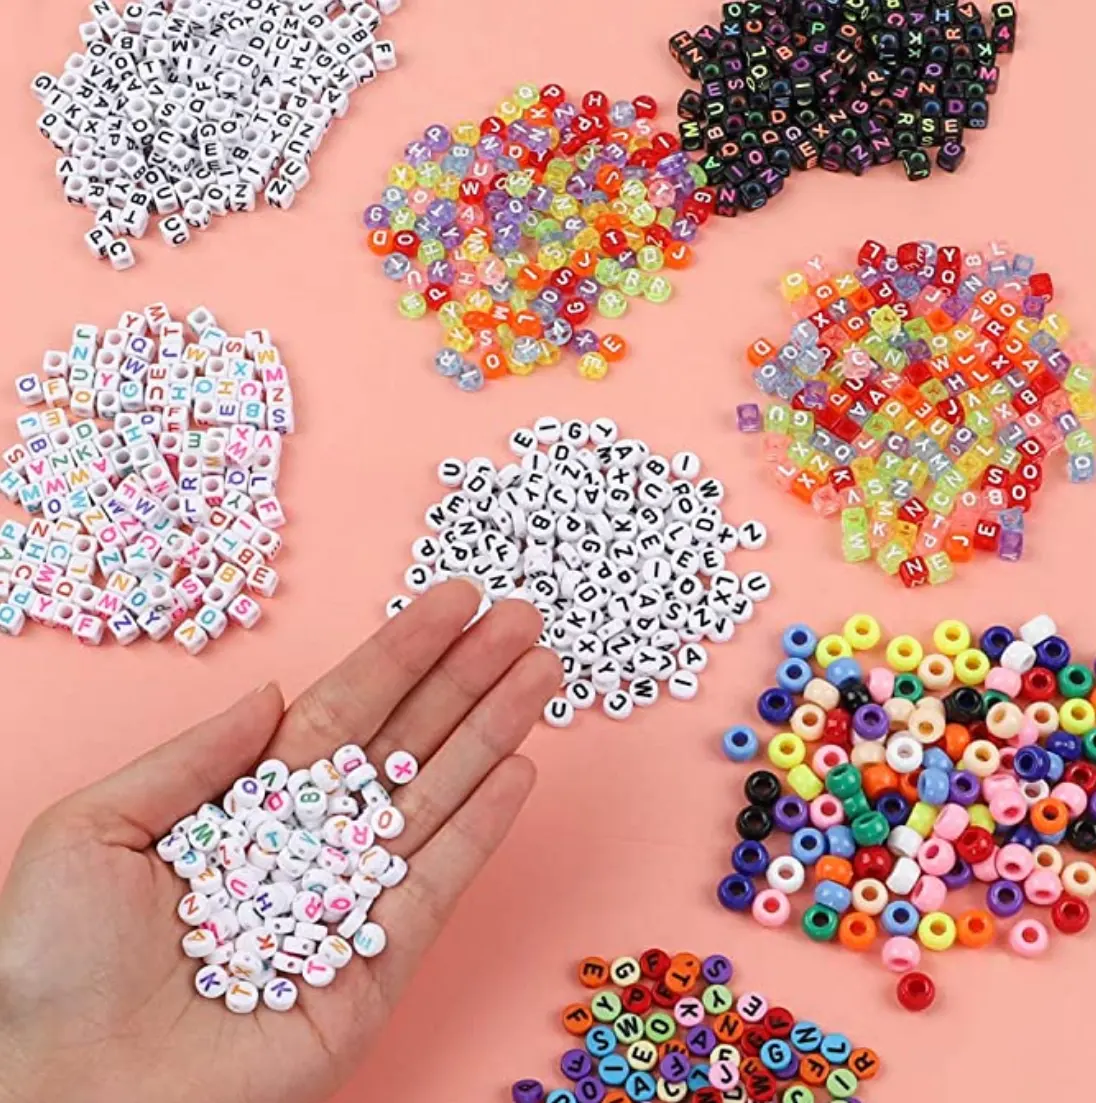 Looseプラスチックアクリル手紙ビーズSquare Number Cube Bead KidsEducation Play Toy For DIY Jewelry Making Supplies